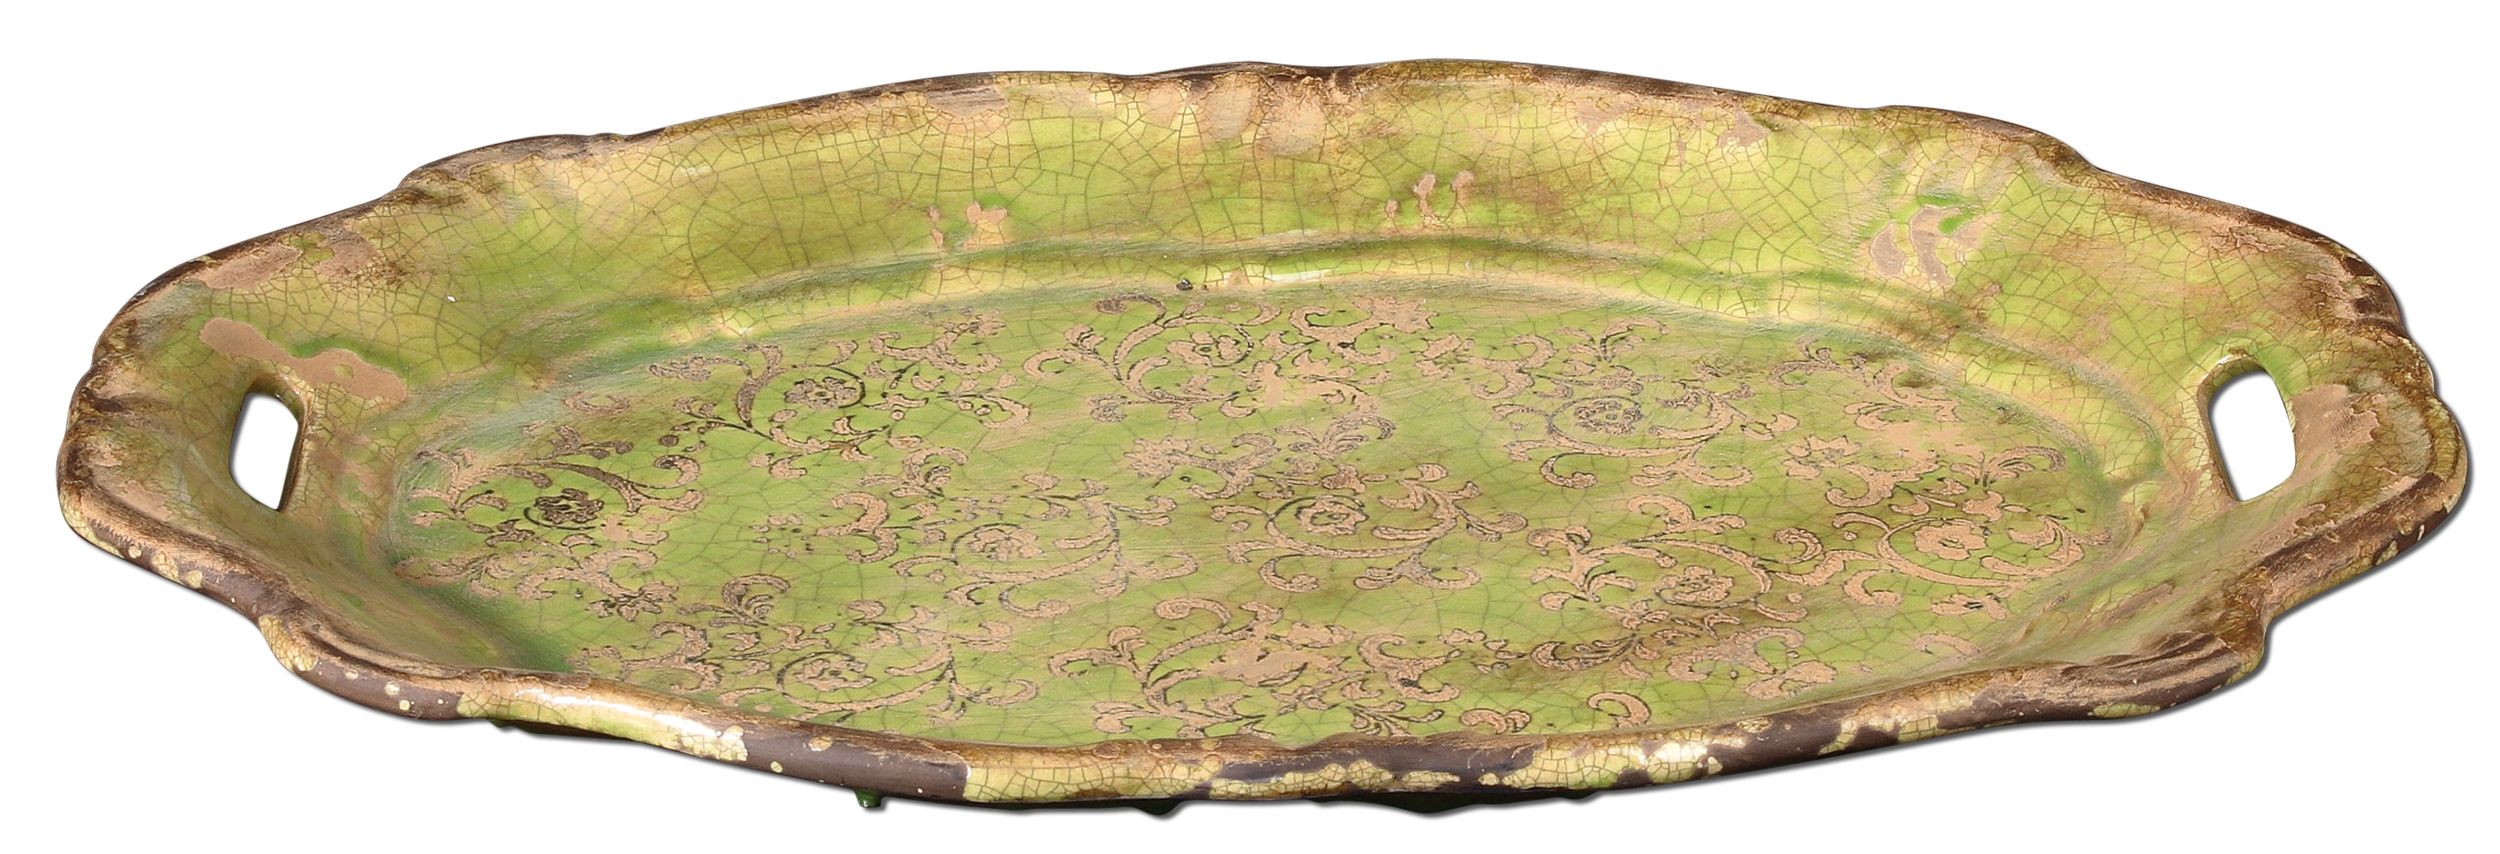 Uttermost 19712 Gian Crackled Green Ceramic Tray